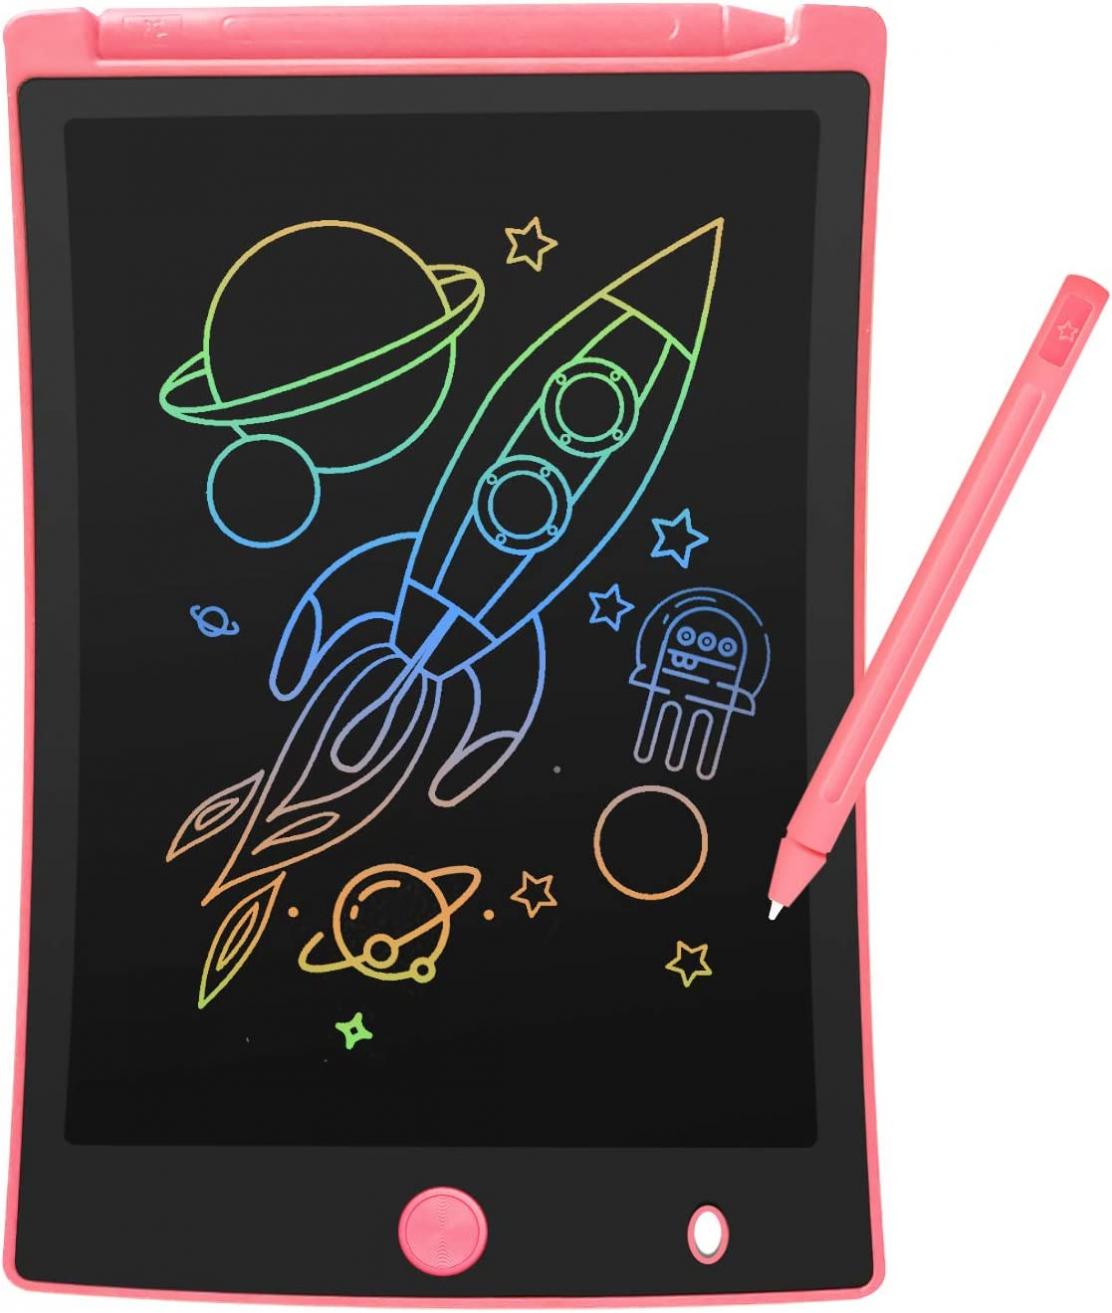 ORSEN Colorful 8.5 Inch LCD Writing Tablet for Kids, Electronic Sketch Drawing Pad Doodle Board, Toddler Travel Learning Educational Toys Activity Games Birthday Gifts for 3 4 5 6 7 8 Year Old Girls